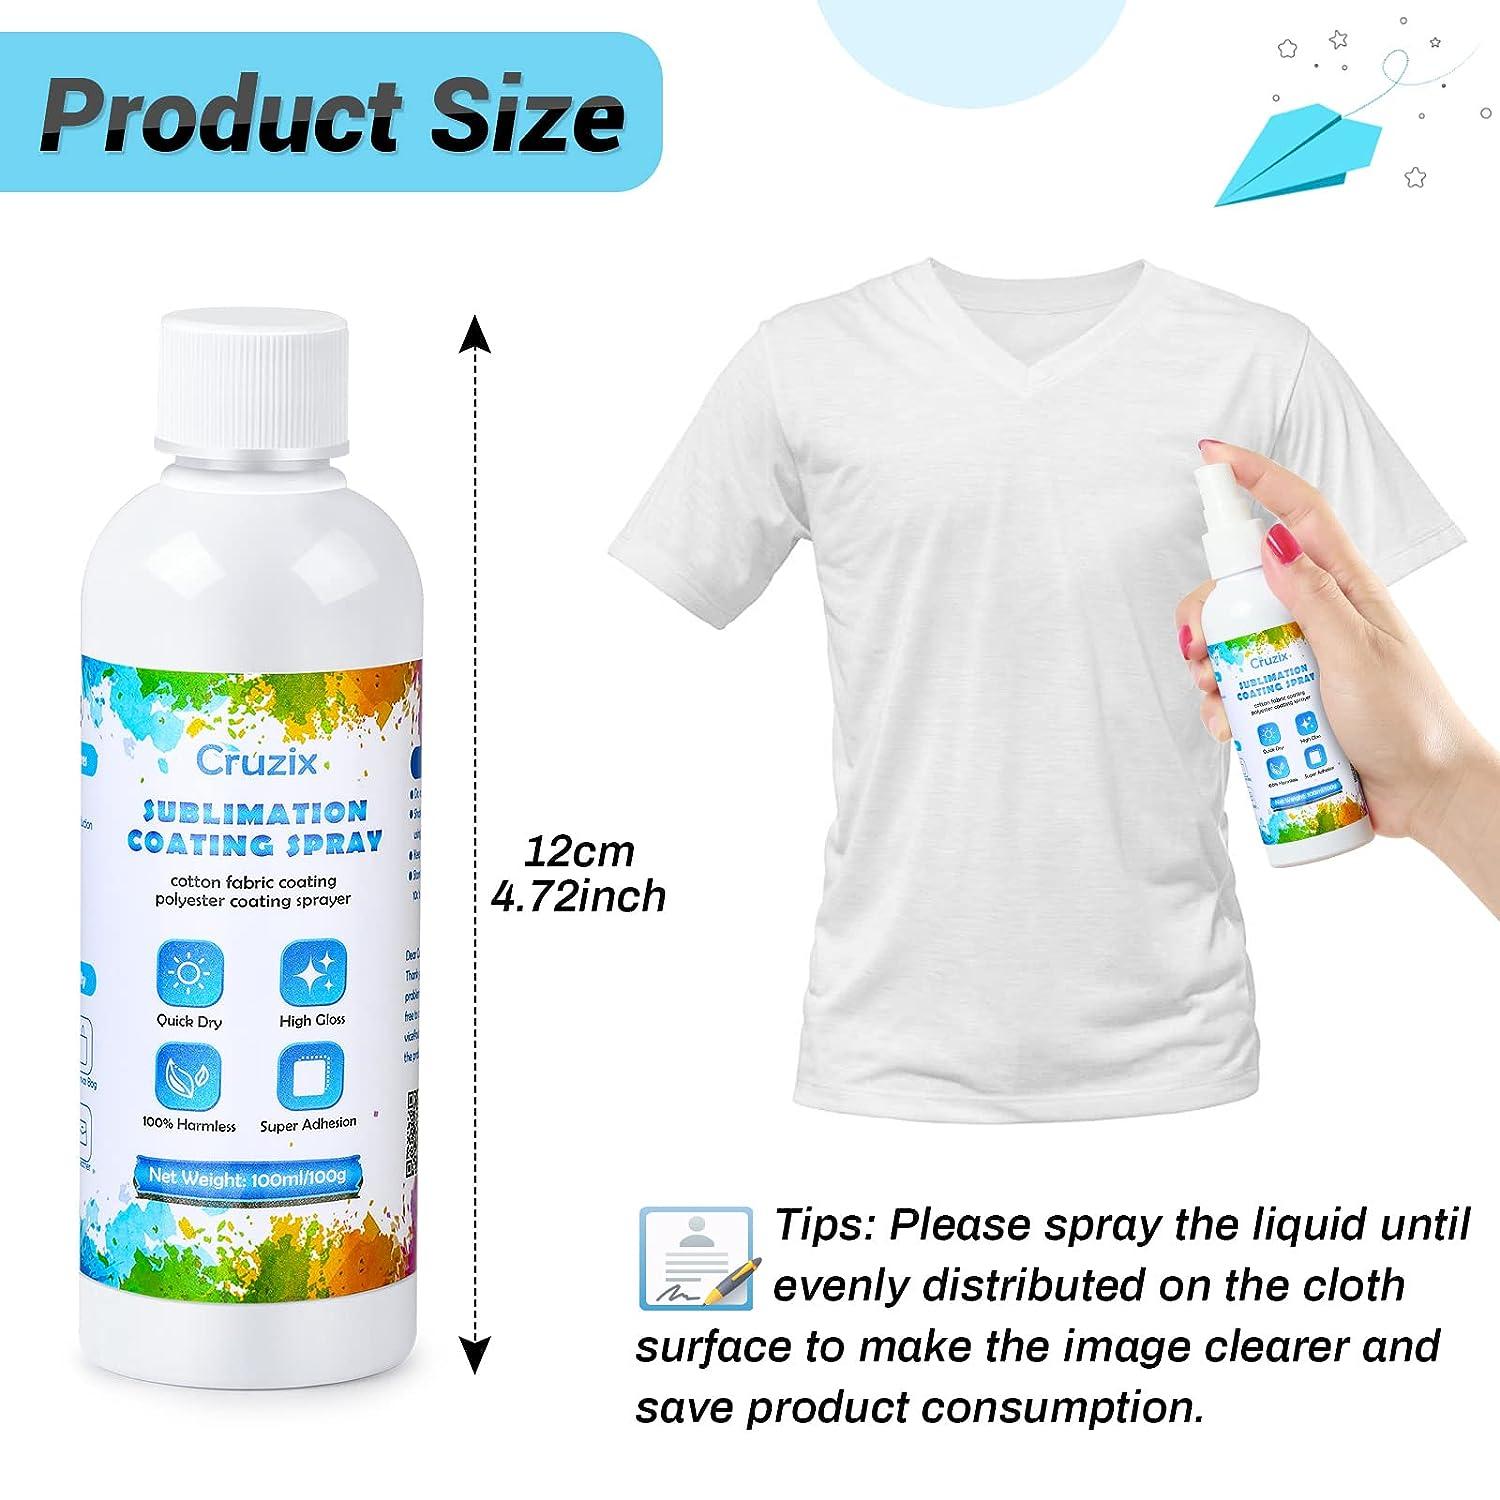 How to Make a Sublimation Spray for Cotton useful for clothes